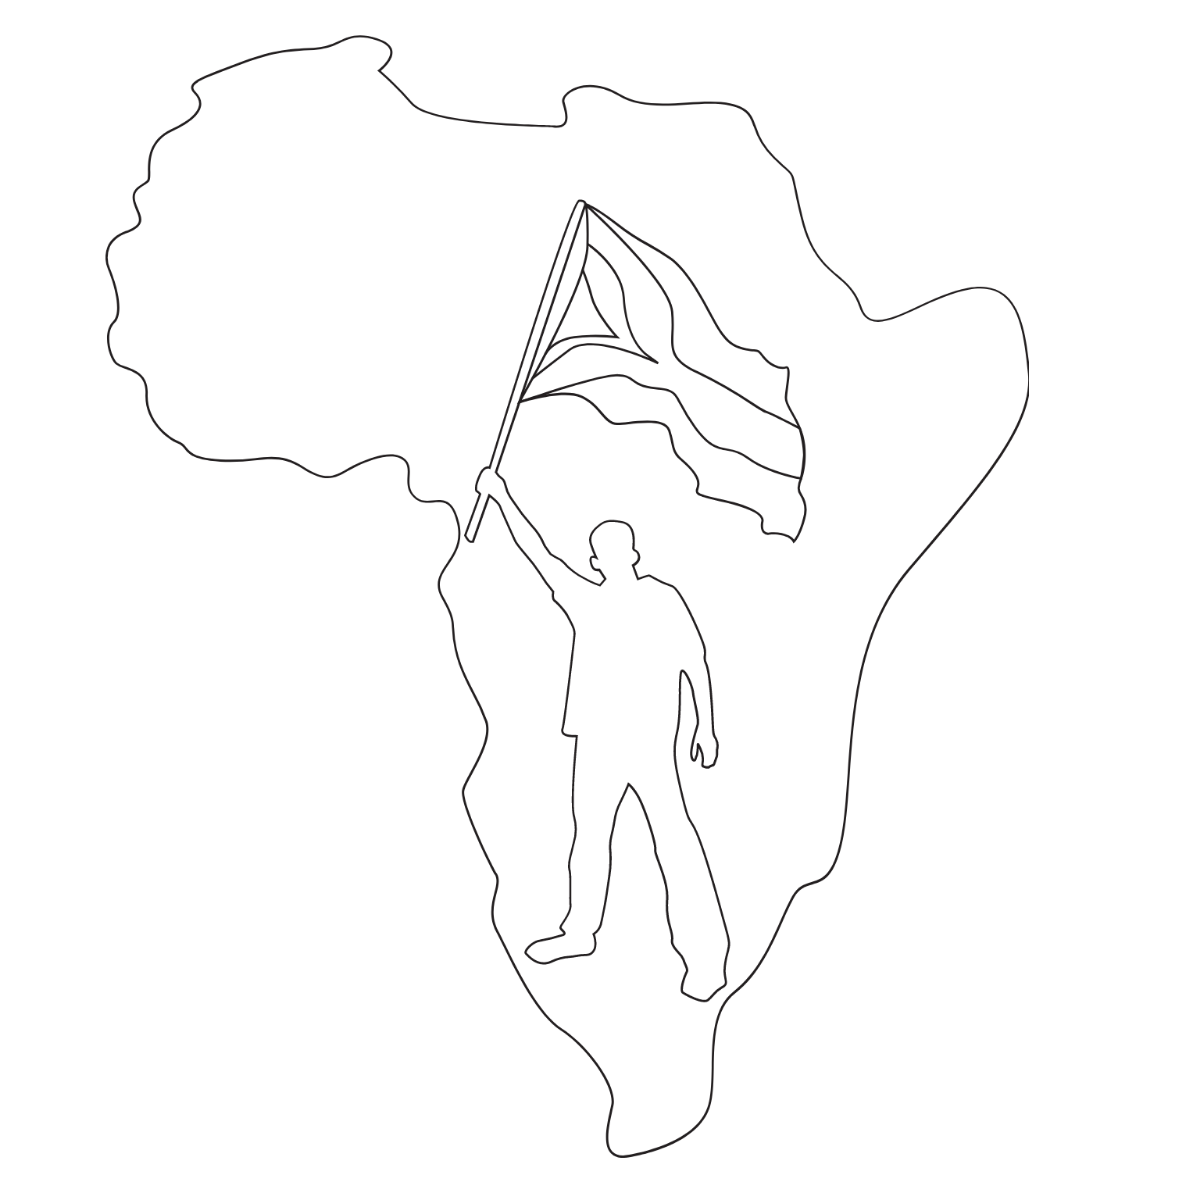 South Africa Freedom Day Outline Template